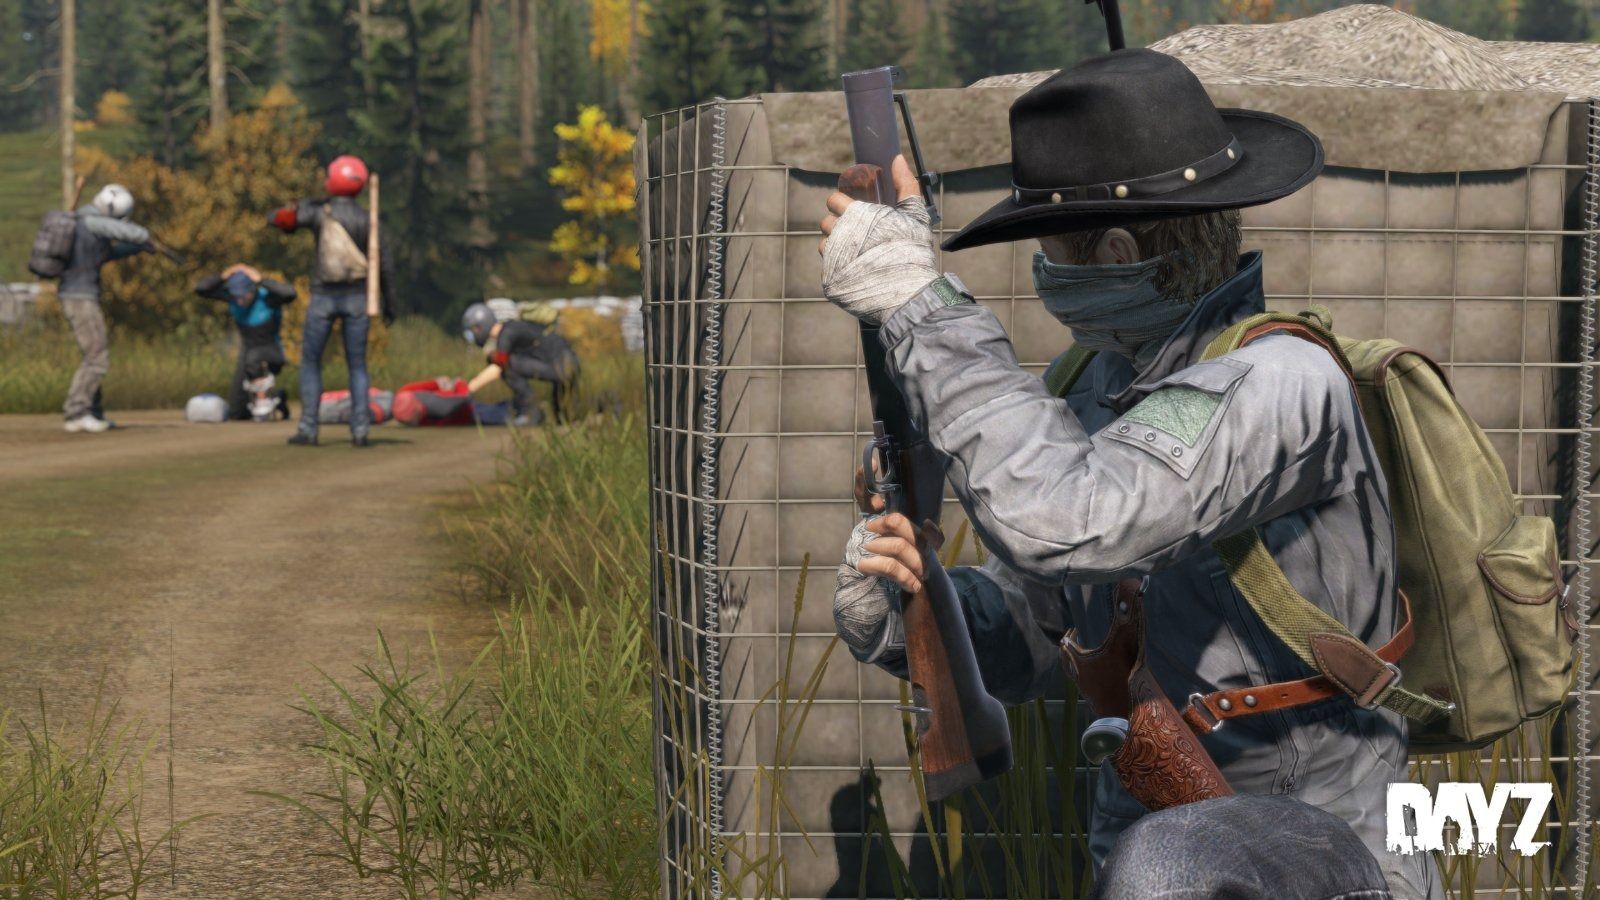 DayZ's biggest update of 2022, Patch 1.19, is now available for download